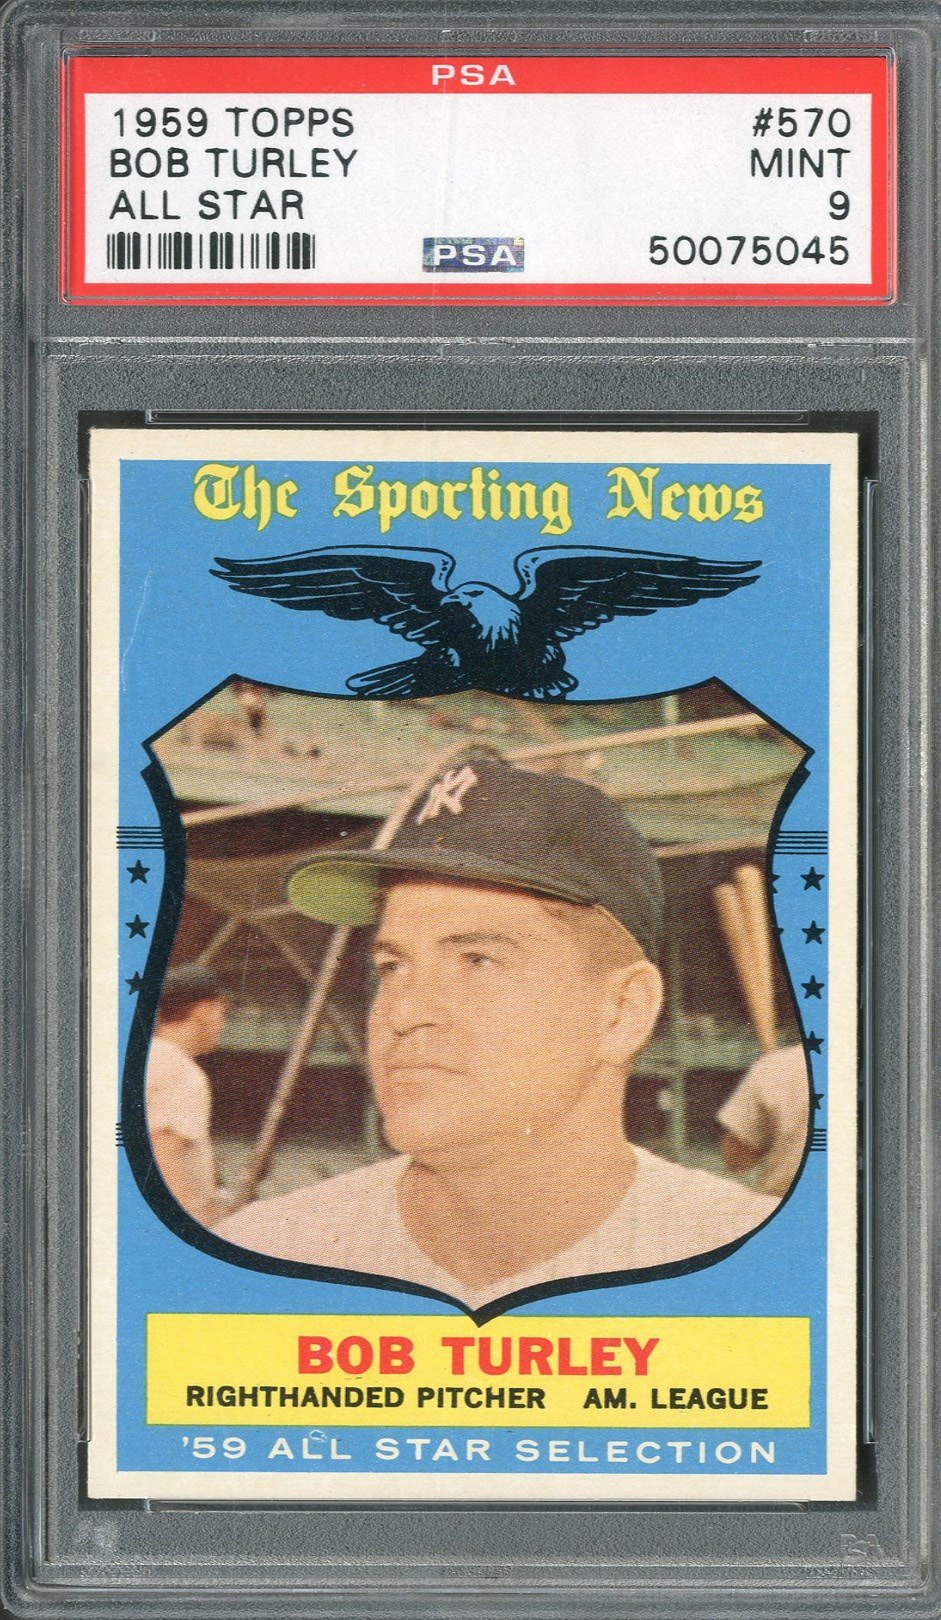 Baseball and Trading Cards - 1959 Topps #570 Bob Turley All Star PSA MINT 9